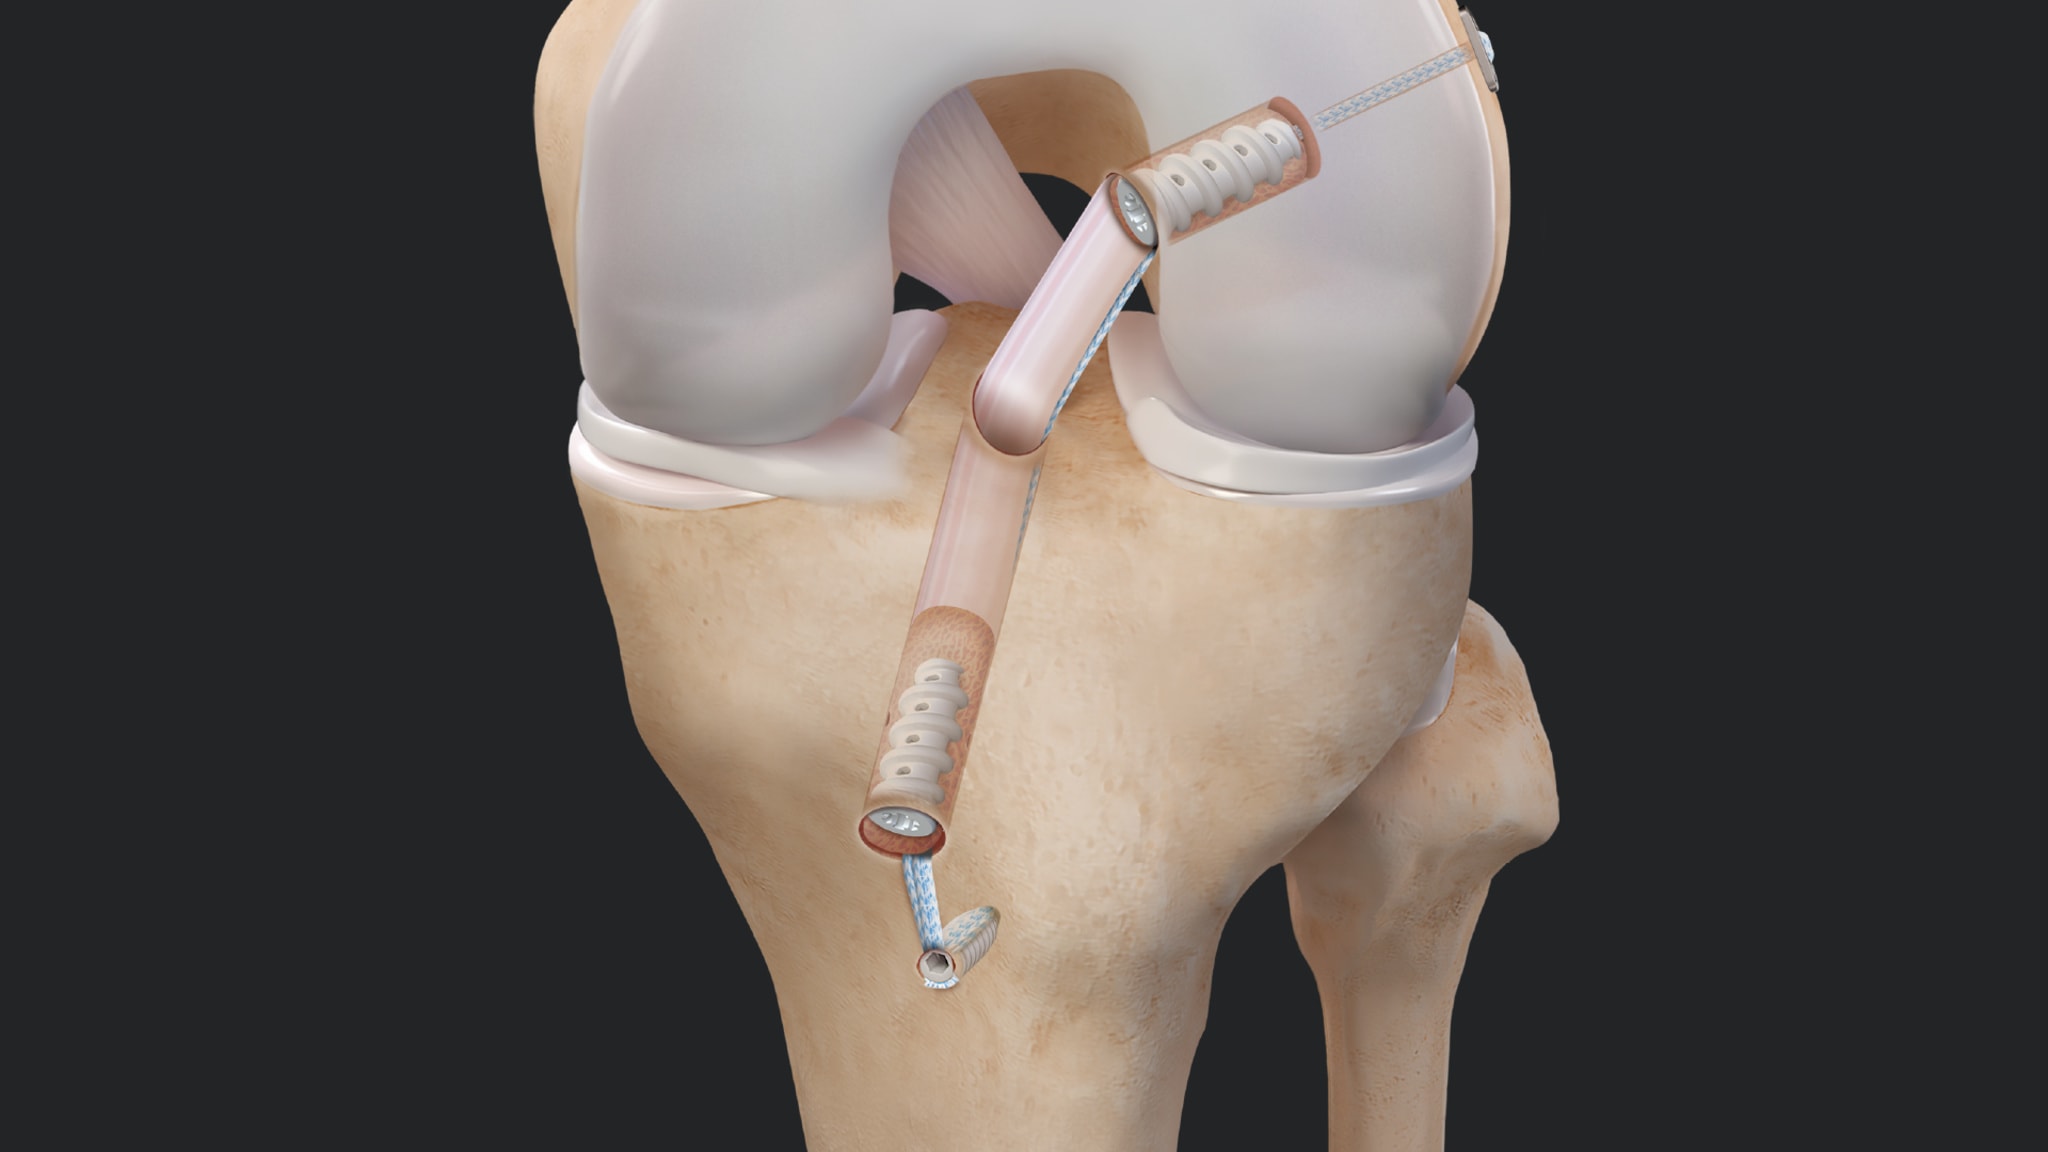 BTB ACL Reconstruction Using BioComposite FastThread™ Interference Screws and the FiberTape® Button for the InternalBrace™ Technique